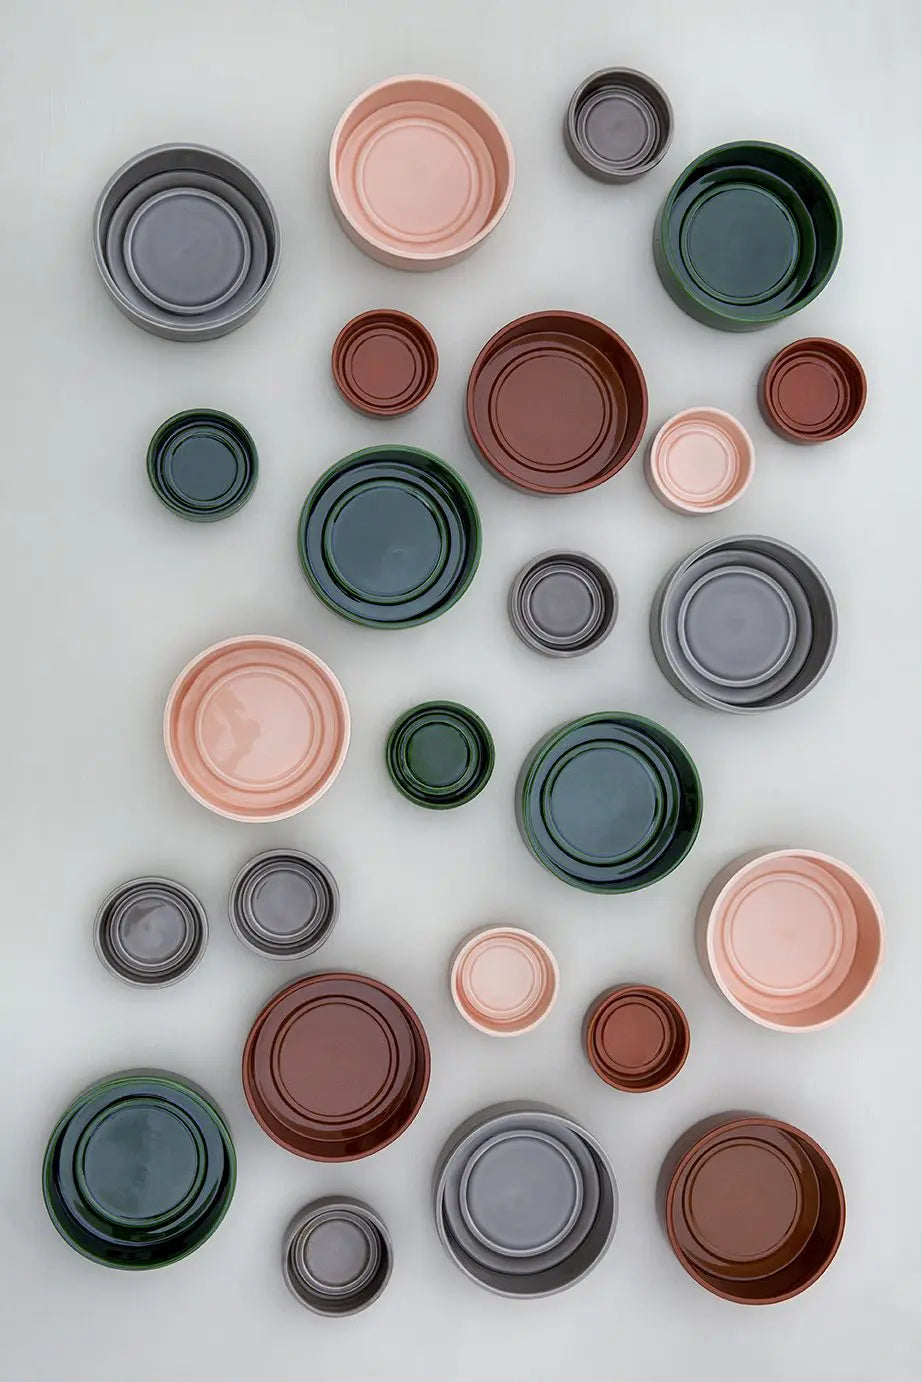 Hoff pots ans saucers in many glazed finishes